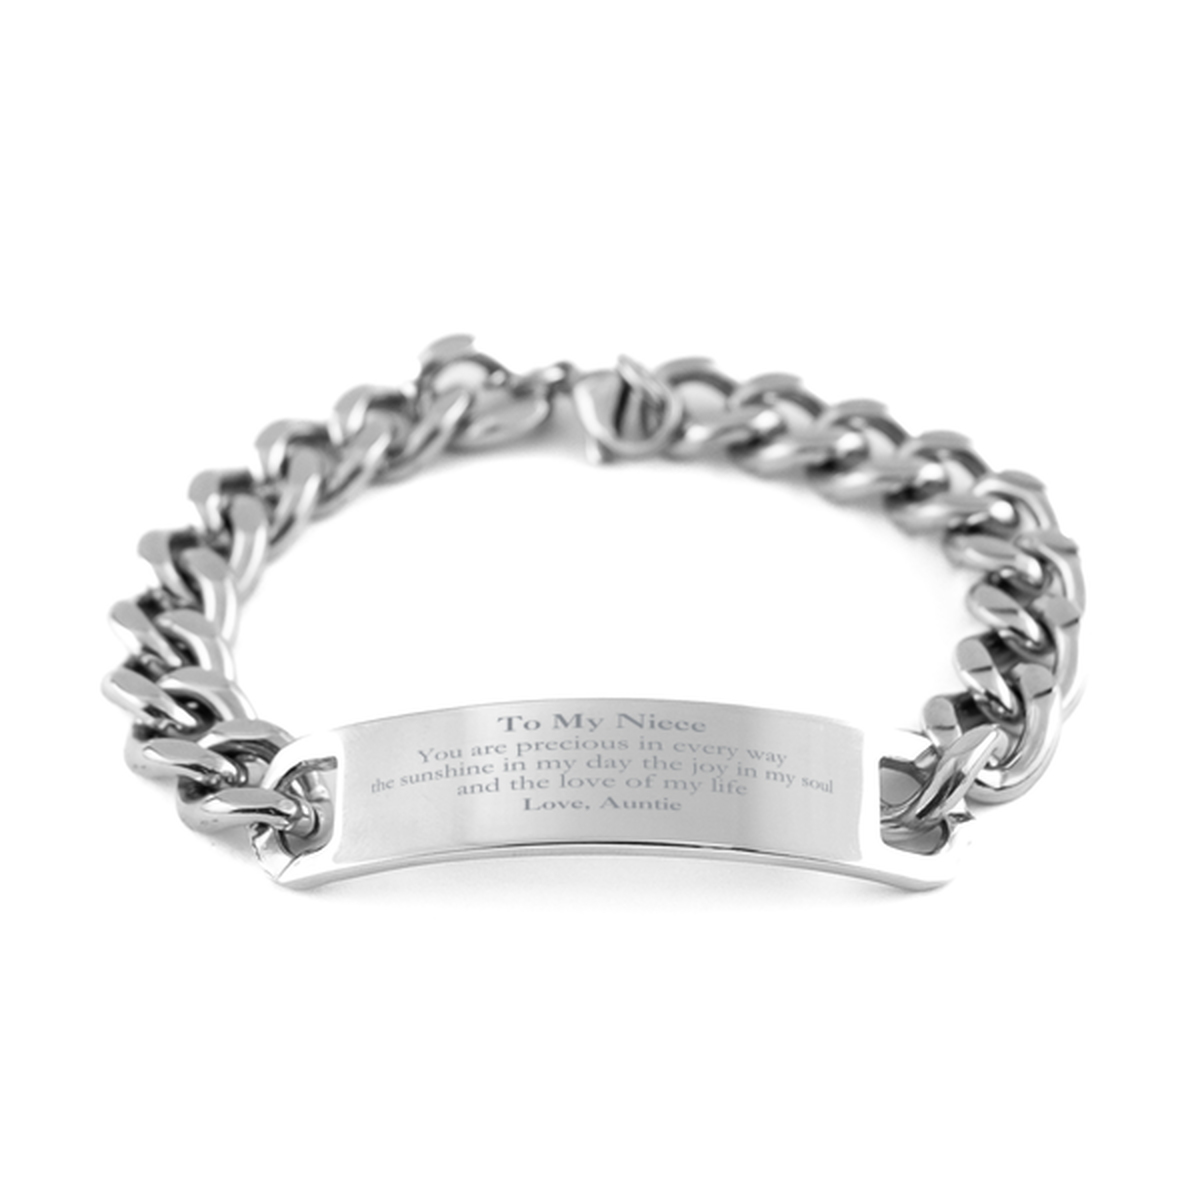 Graduation Gifts for Niece Cuban Chain Stainless Steel Bracelet Present from Auntie, Christmas Niece Birthday Gifts Niece You are precious in every way the sunshine in my day. Love, Auntie